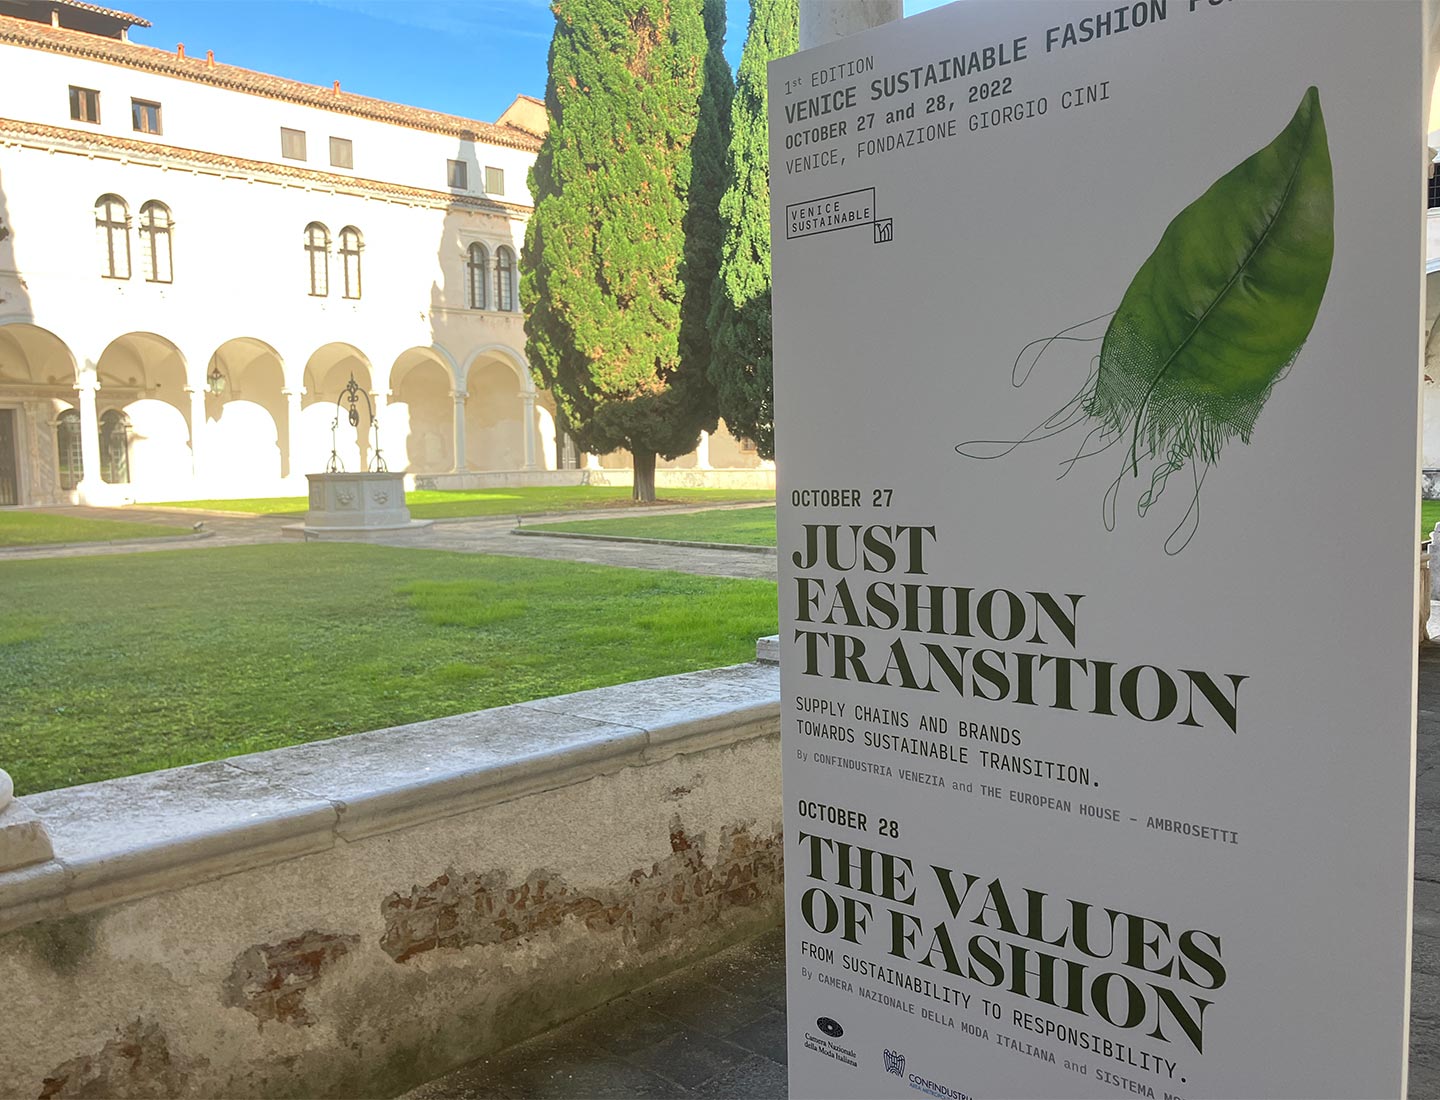 The first international summit dedicated to the sustainable transition of the fashion industry took place in Venice, at Fondazione Giorgio Cini